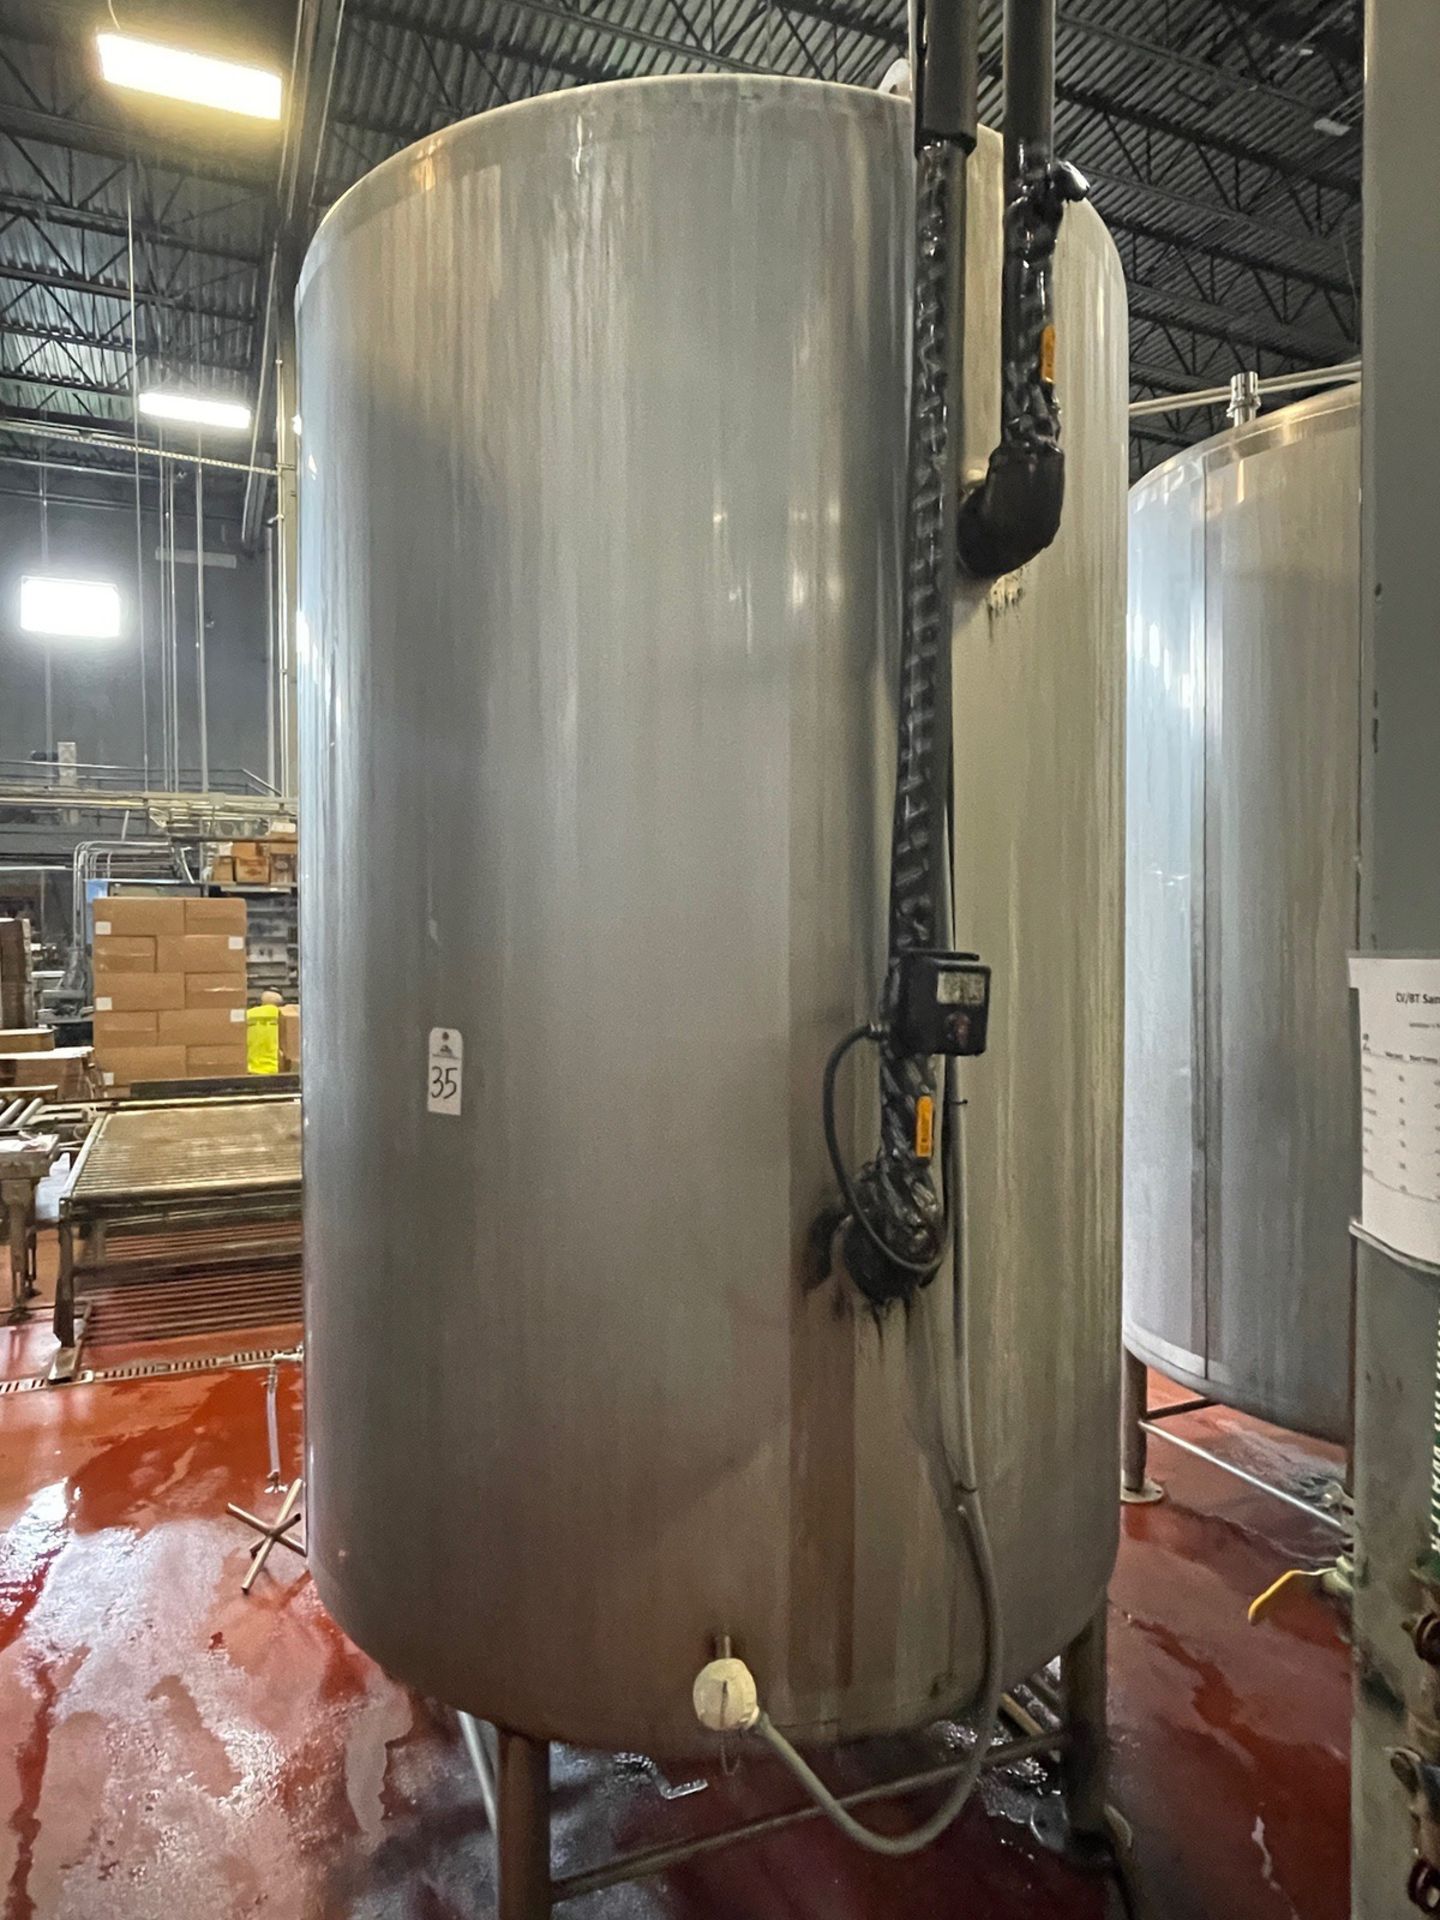 2007 Sprinkman 1250 Gal Stainless Steel Brite Tank, Glycol Jacketed, Rounded Bottom | Rig Fee $1500 - Image 8 of 9